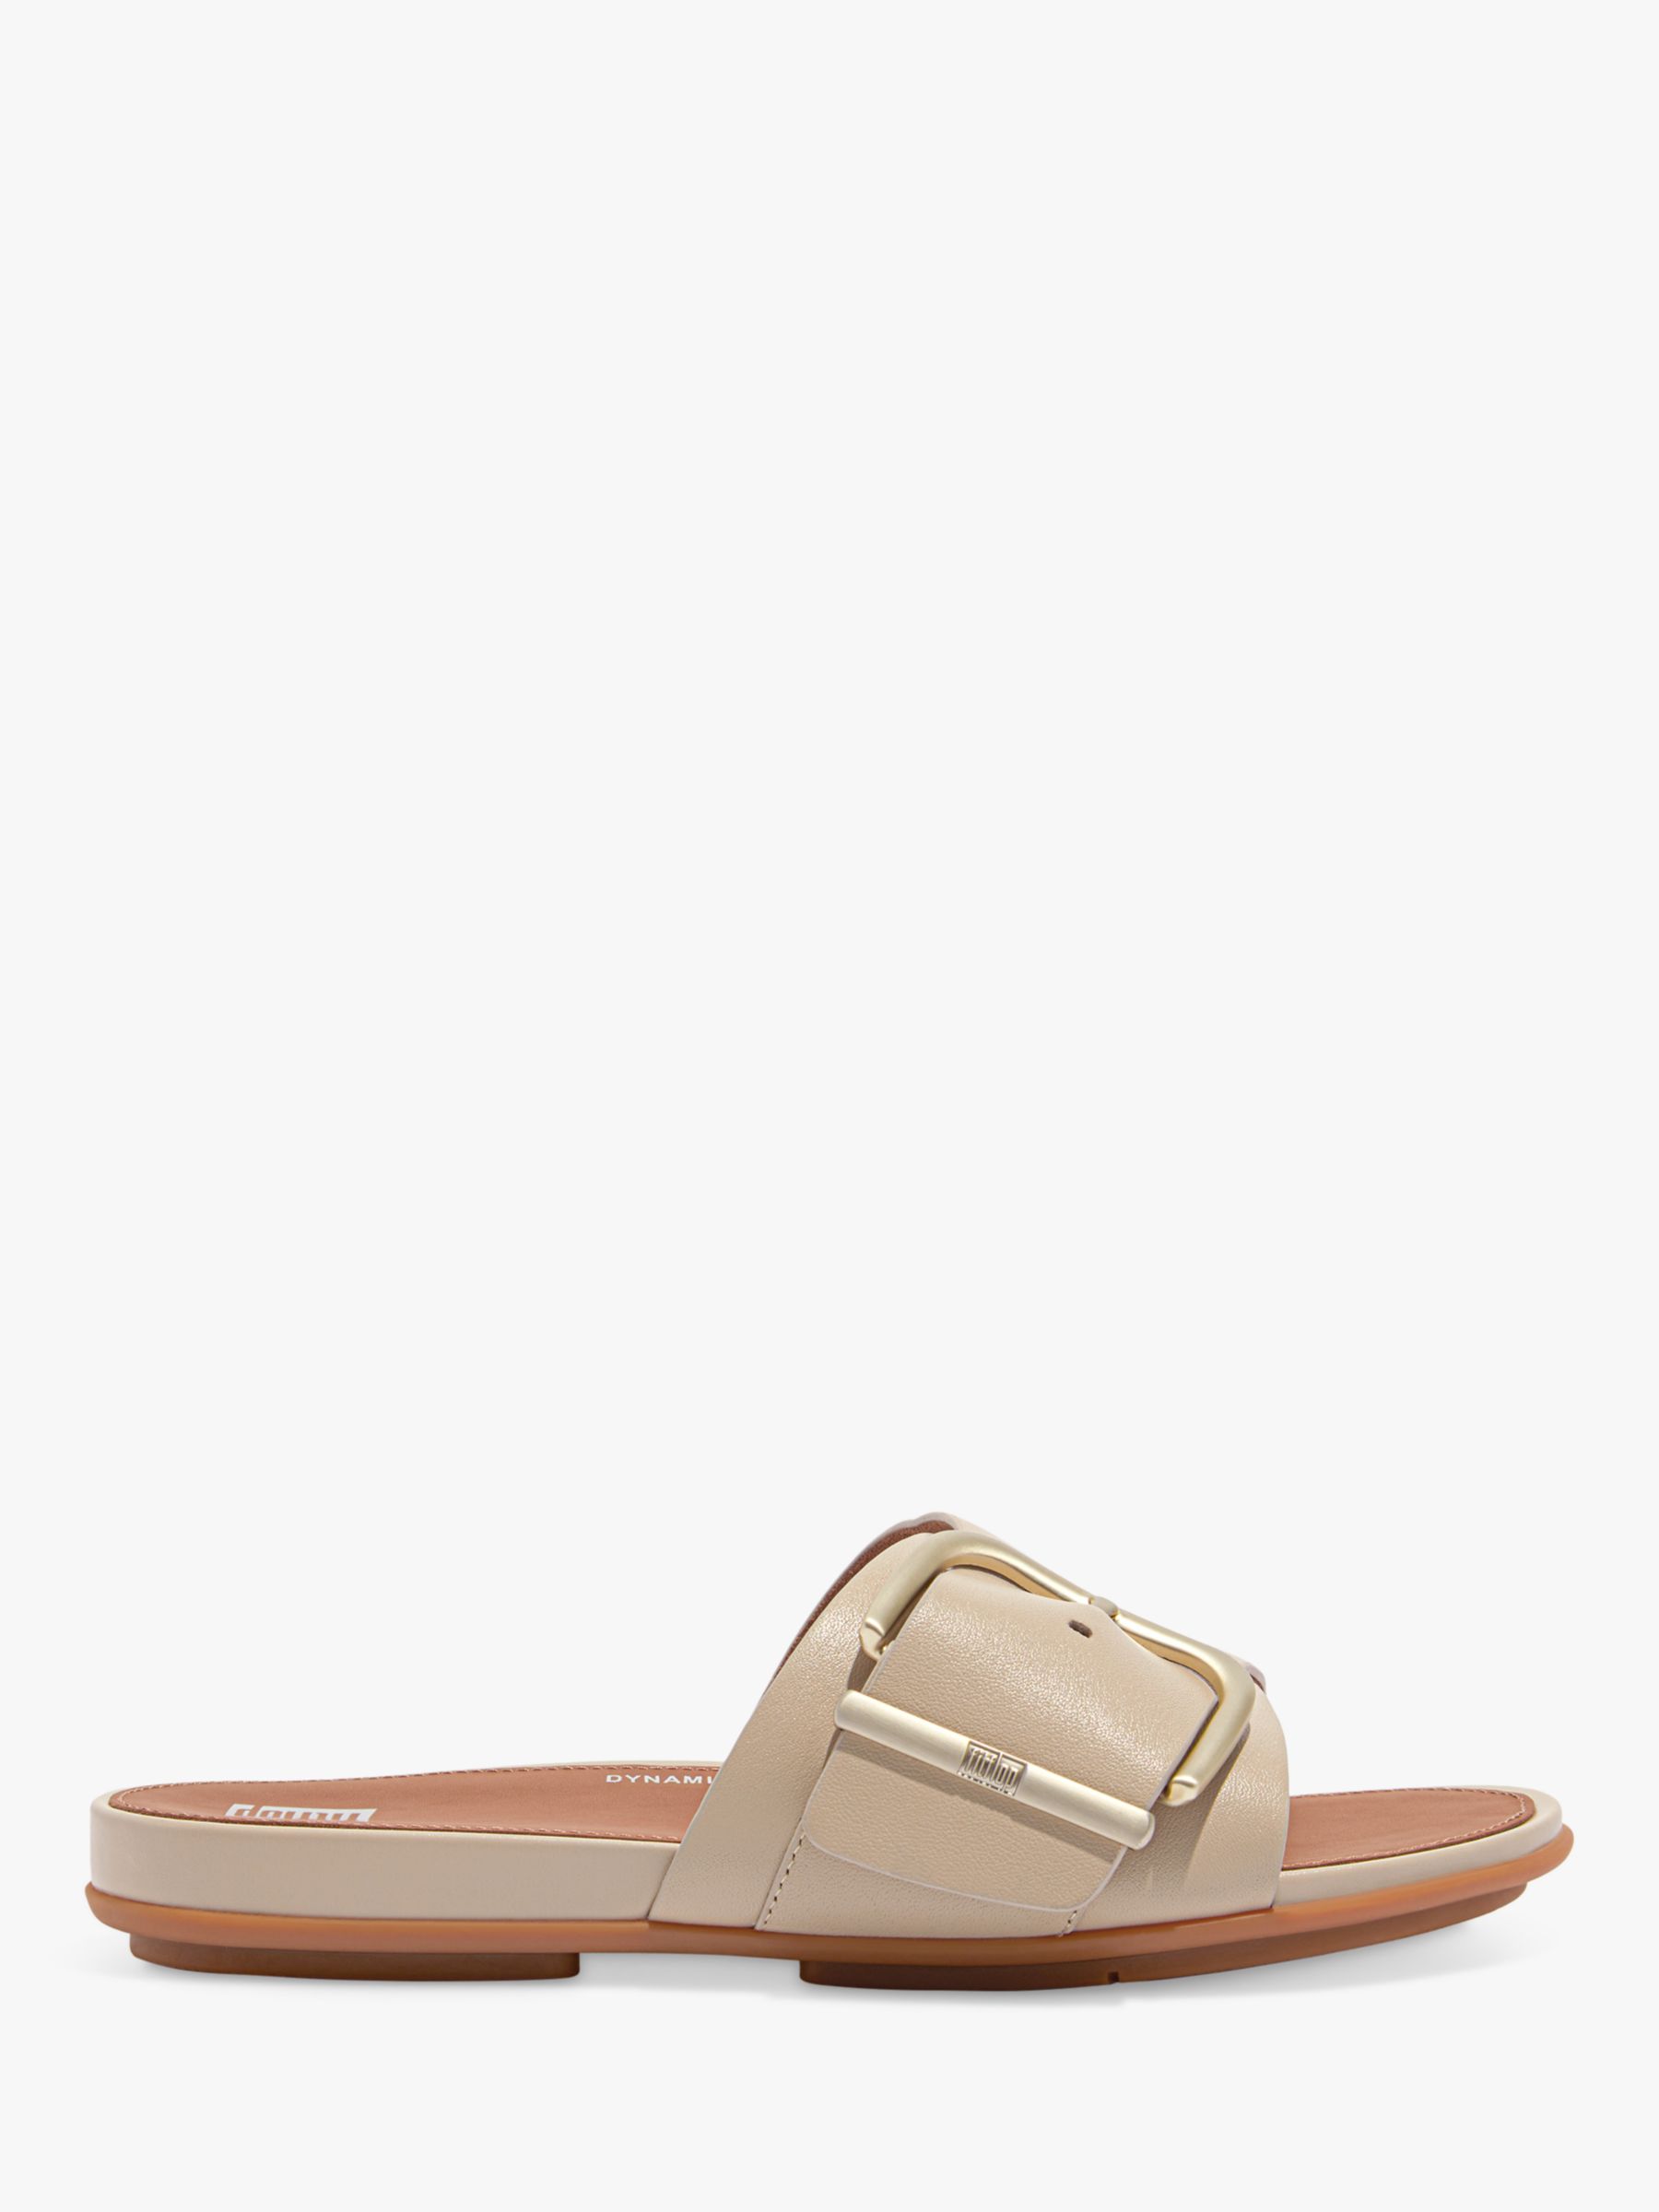 FitFlop Gracie Buckle Pool Sandals, Stone Beige, 9